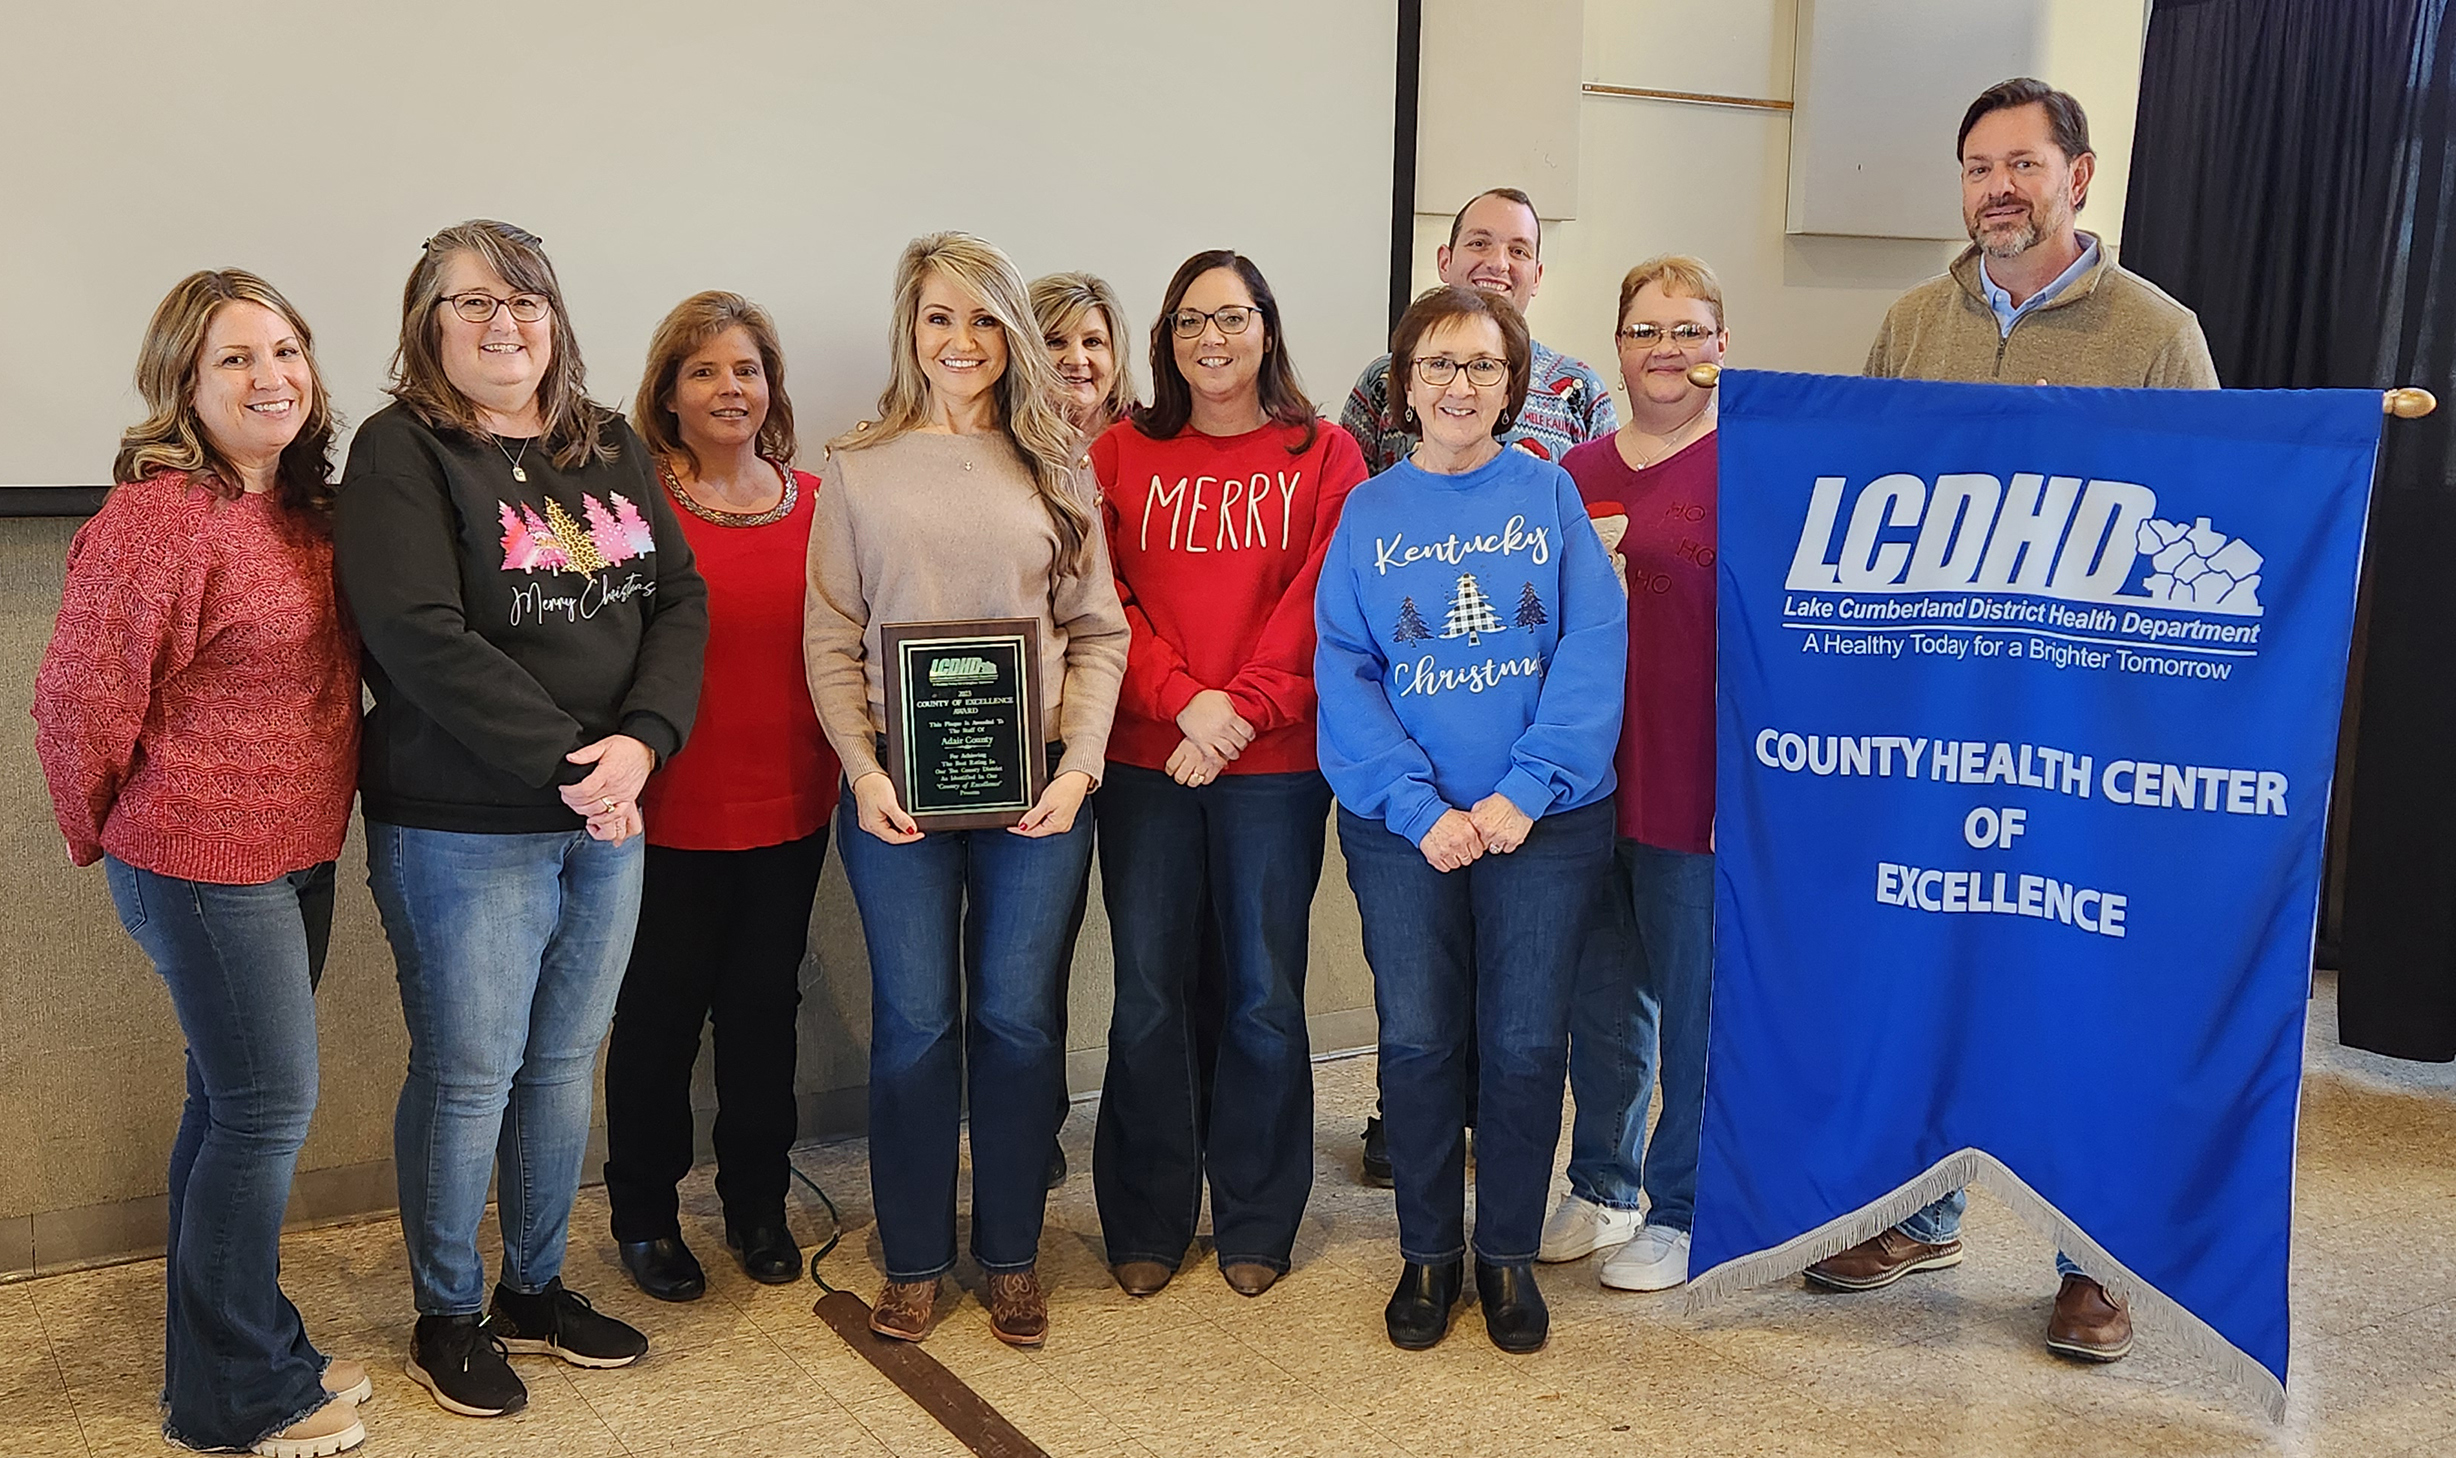 The Adair County Health Department staff received their plaque and County Health Center of Excellence banner after being ranked the top health department in the Lake Cumberland District.